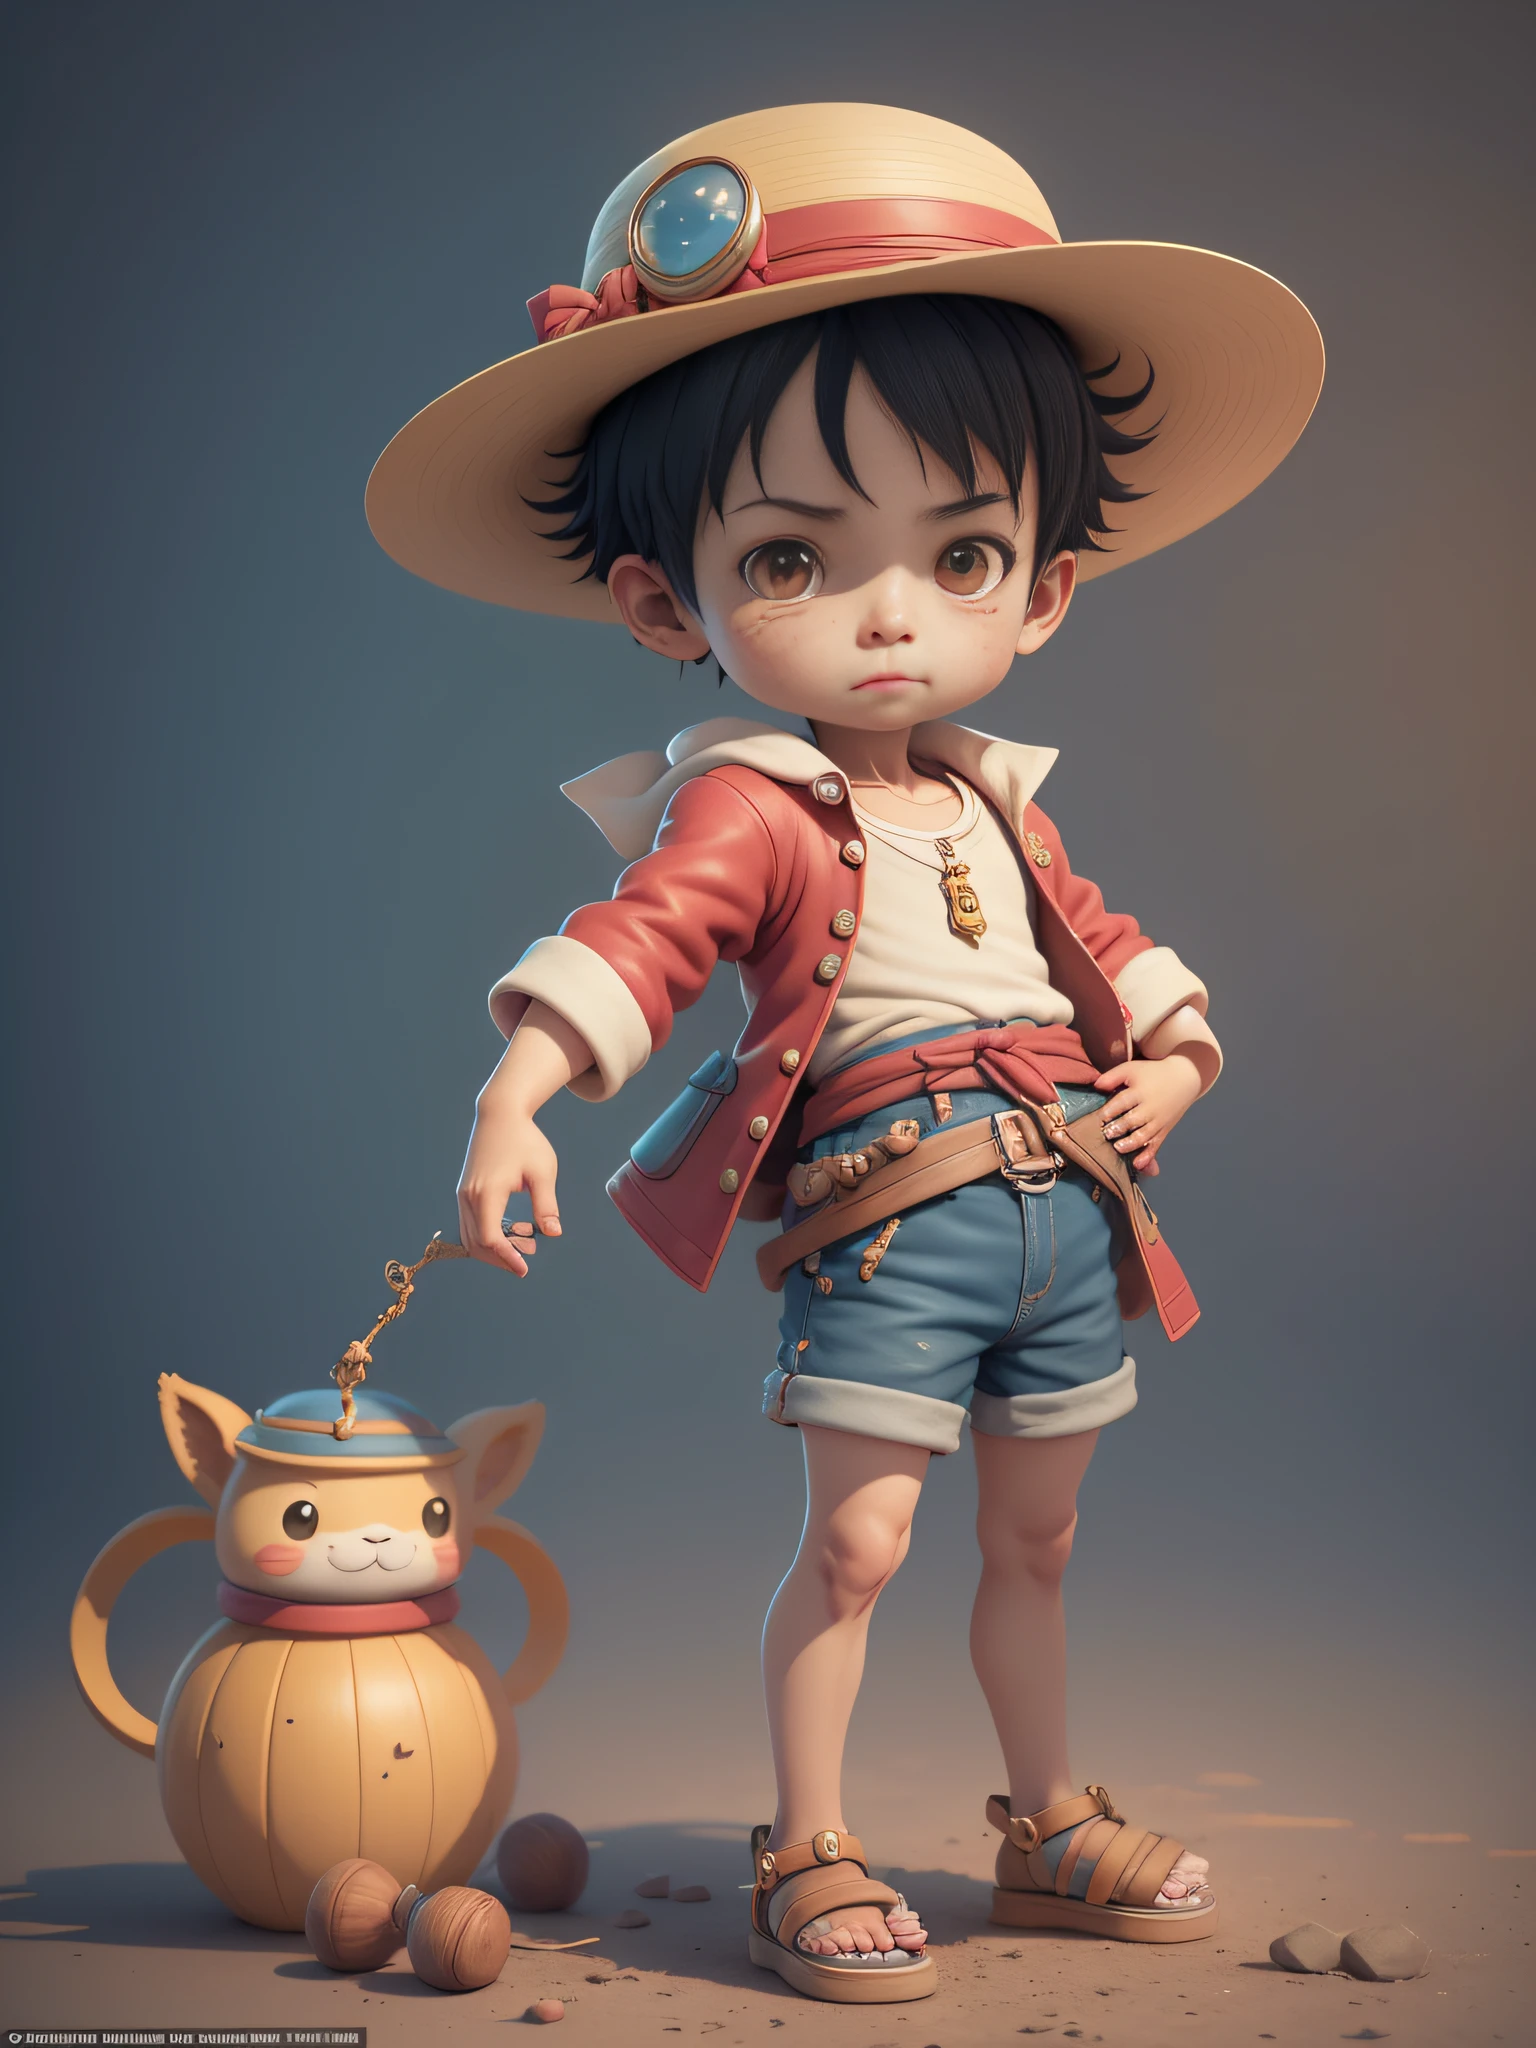 cute 3d render, cute detailed digital art, male explorer mini cute boy, cute digital painting, stylized 3d render, cute digital art, cute render 3d anime boy, luffy the little pirate looks up, cute! c4d, portrait anime sea pirate boy, he is wearing an open long-sleeved red cardigan with four buttons, with a yellow sash tied around his waist, blue shorts with cuffs, sandals, straw hat.